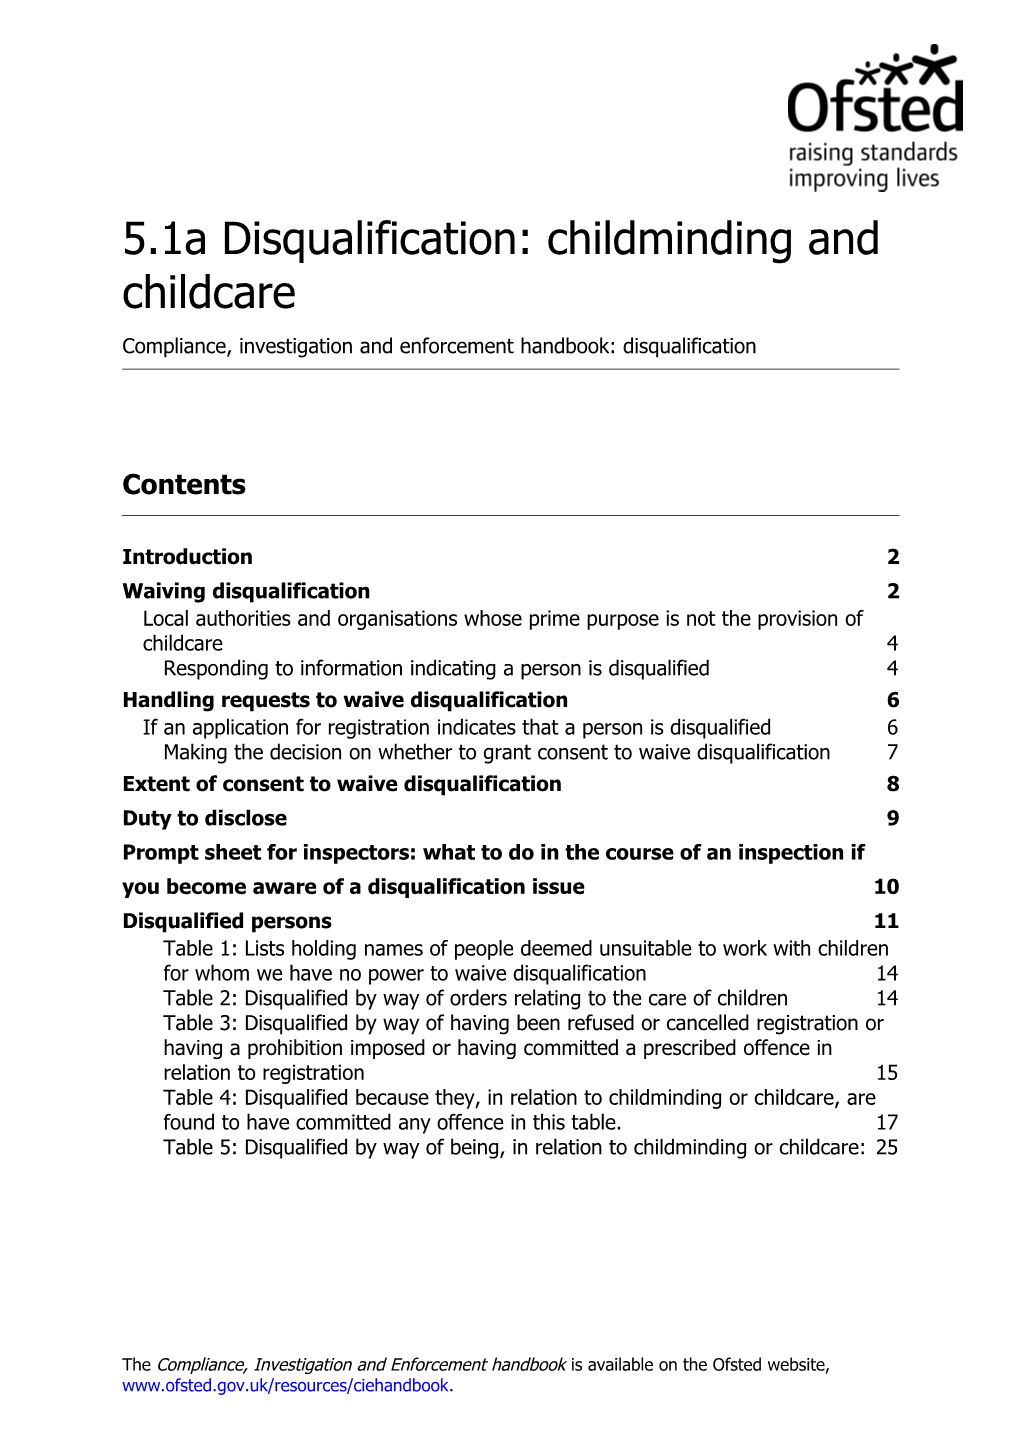 5.1Adisqualification: Childminding and Childcare